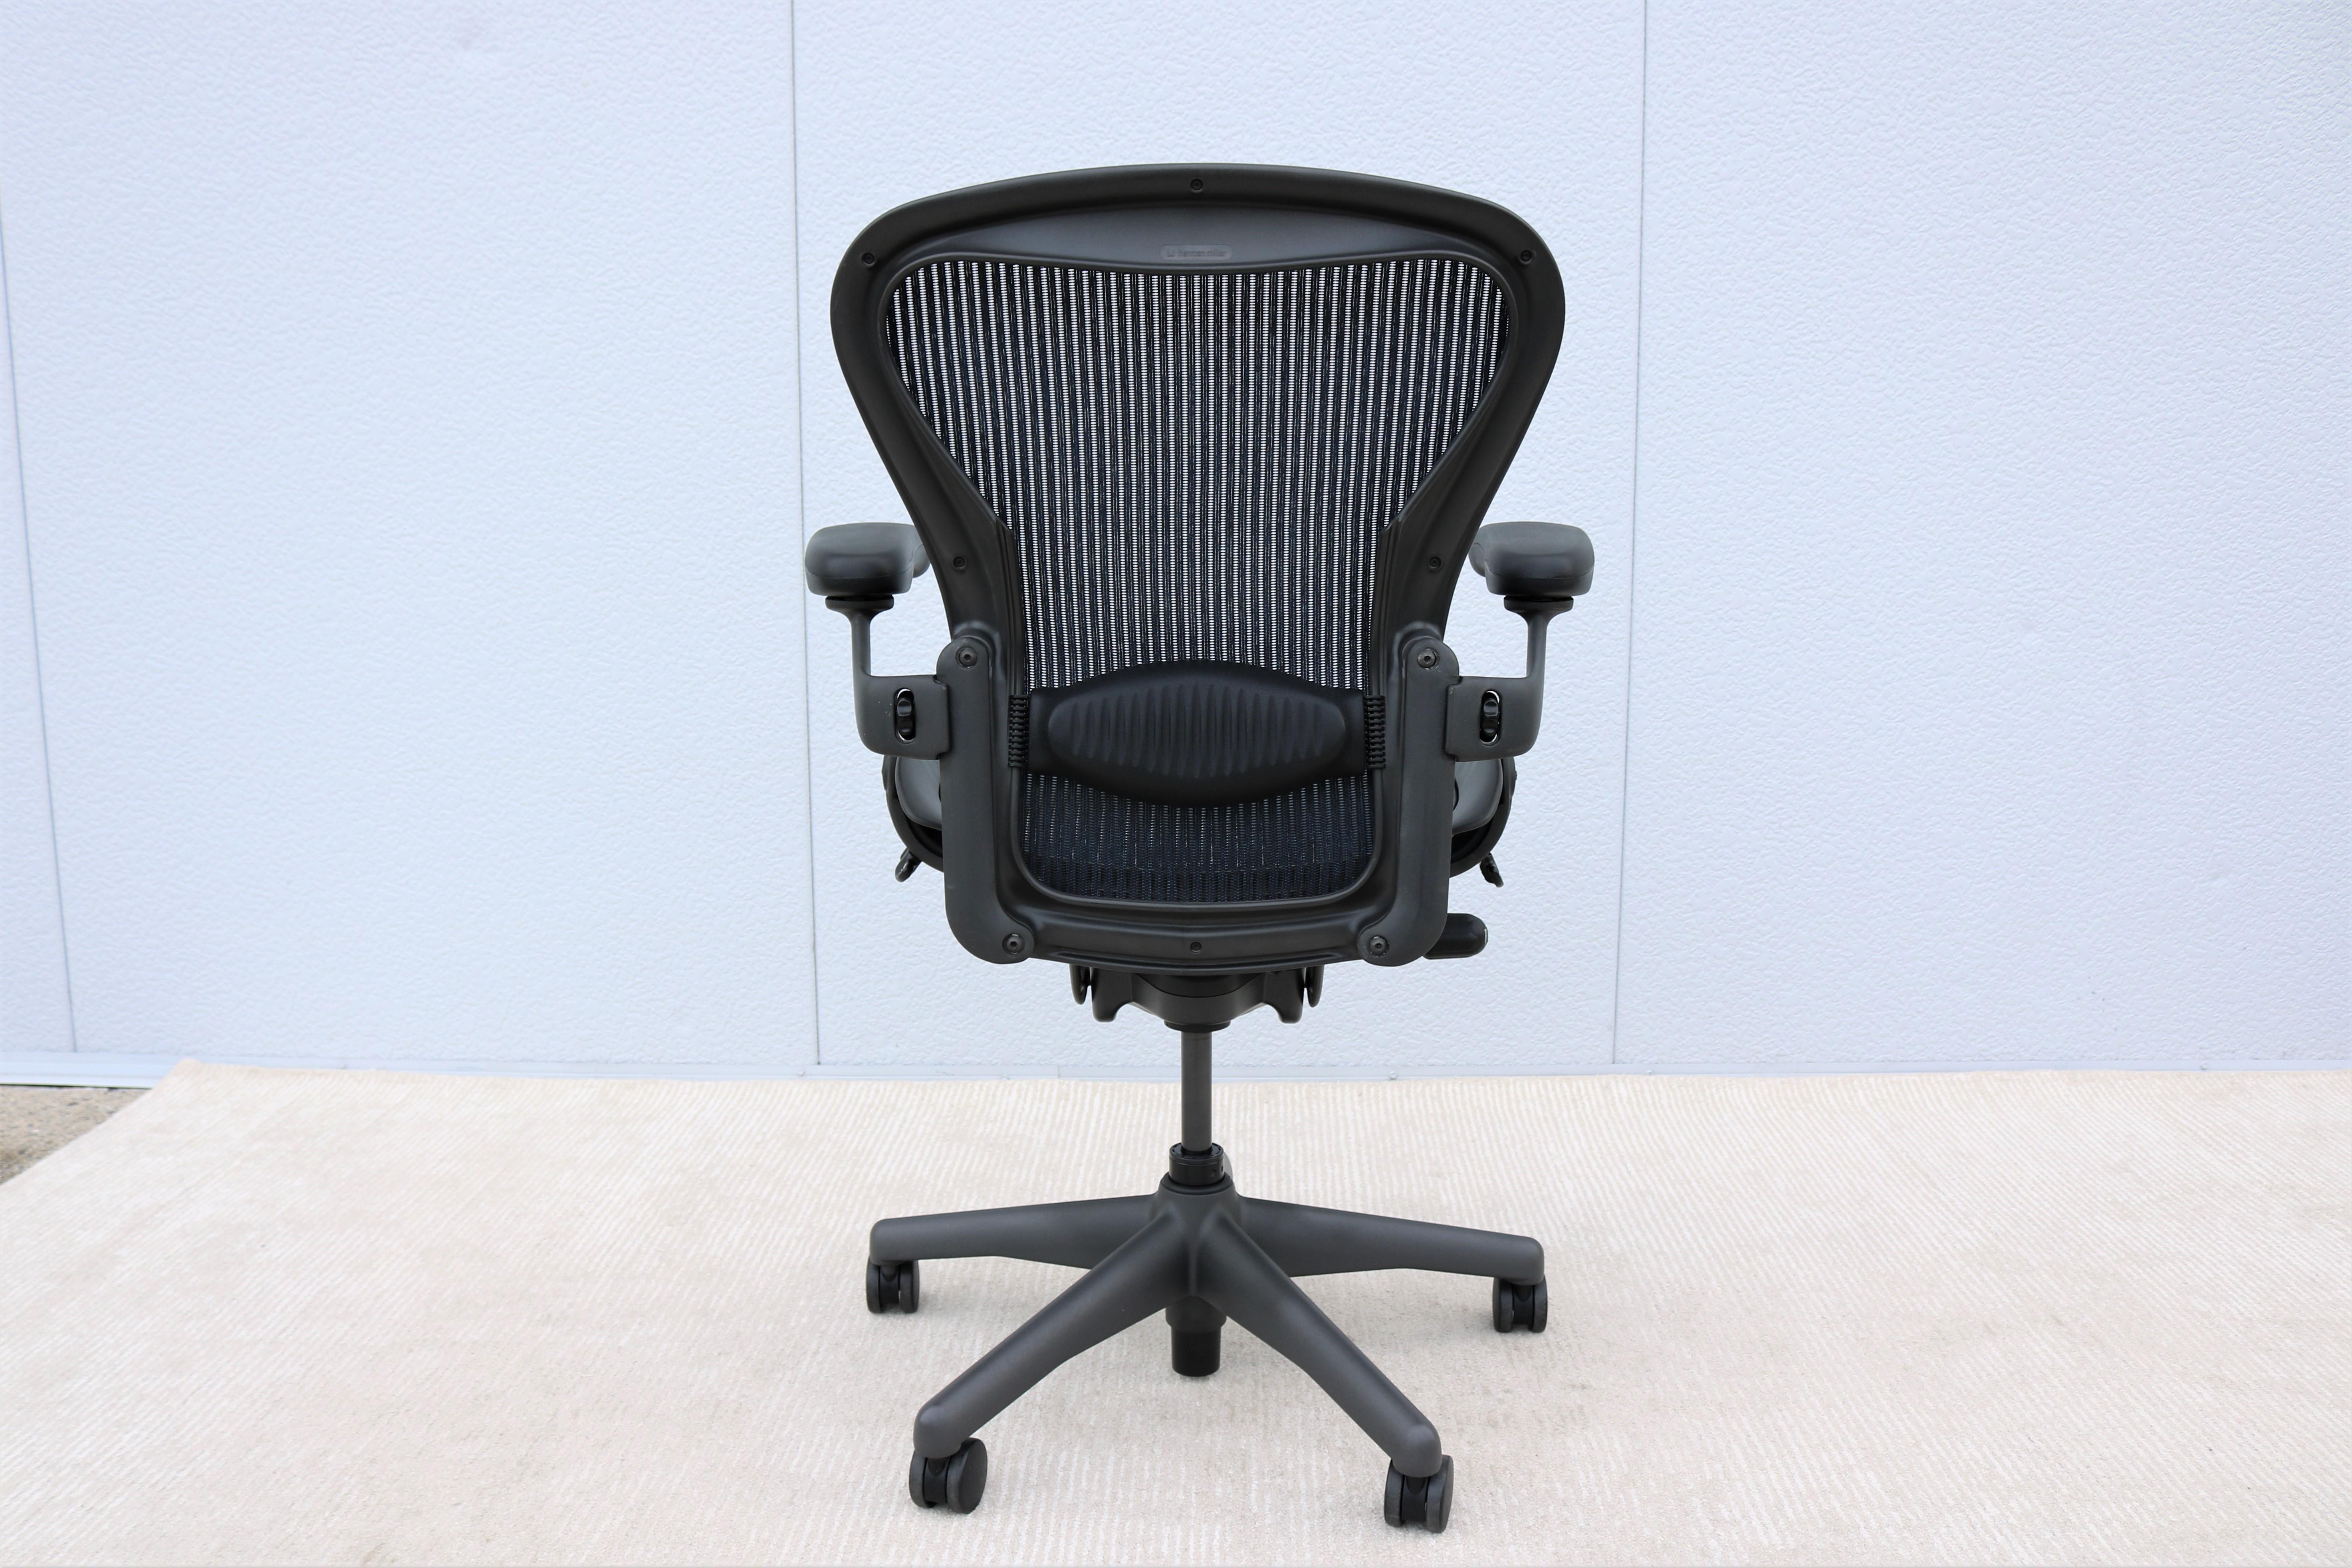 Contemporary Modern Herman Miller Aeron Chair Size B in Blue Mesh Fabric Fully Adjustable